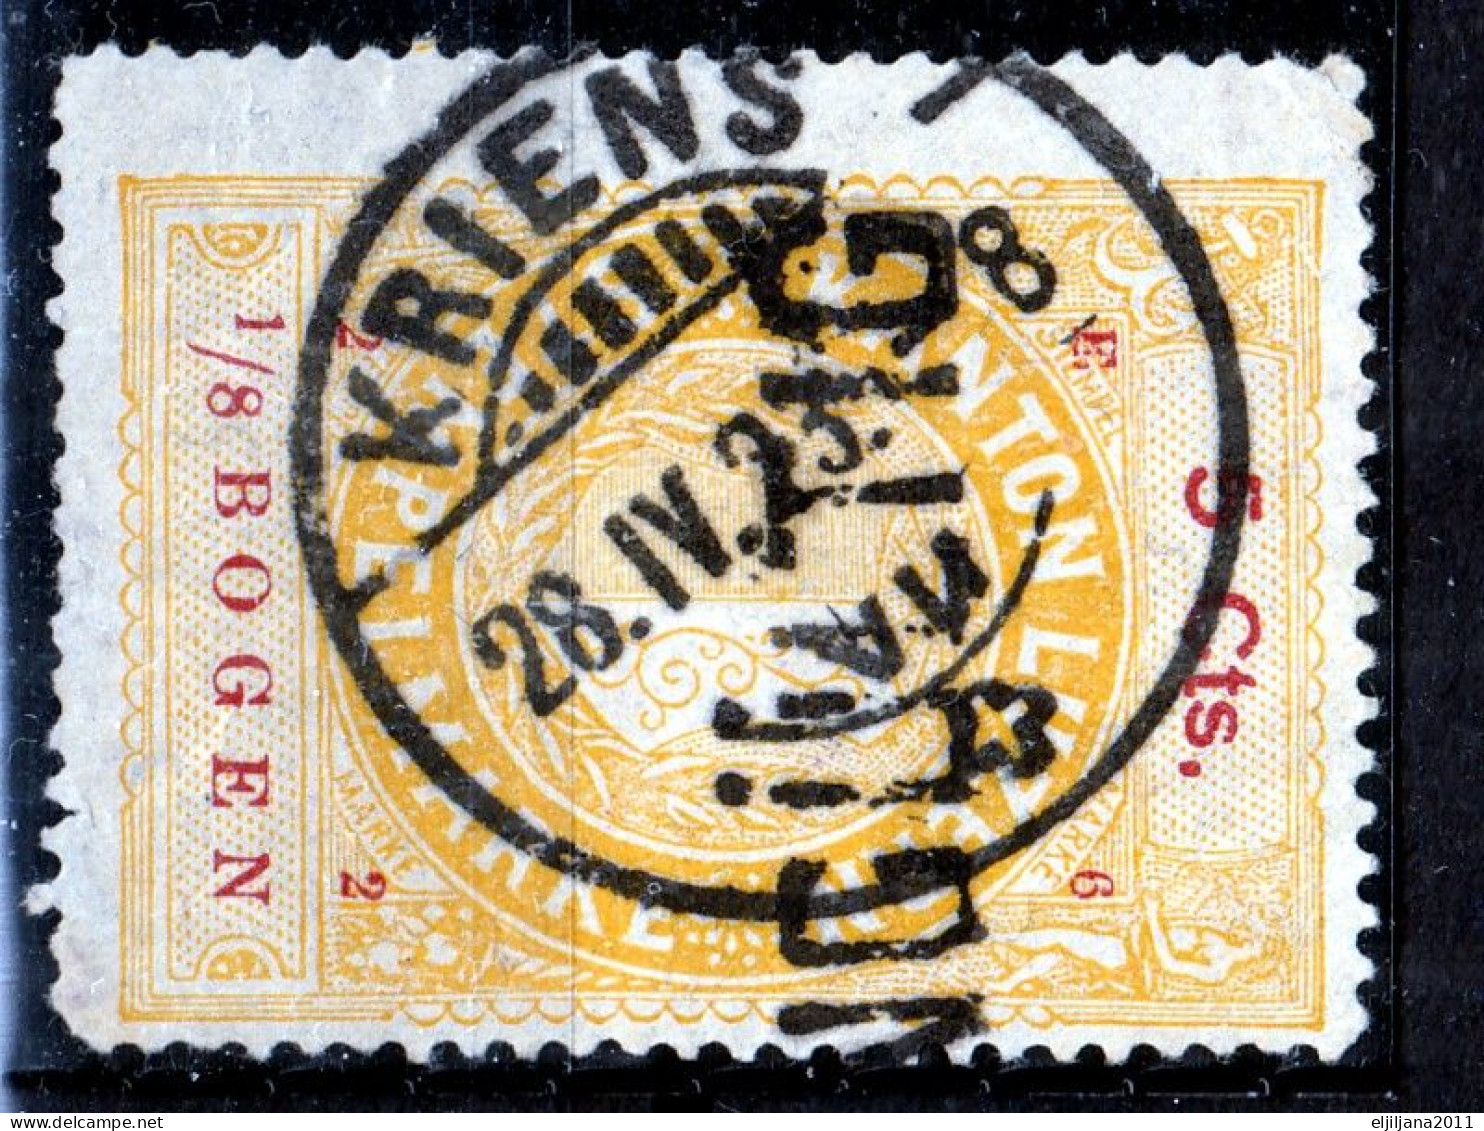 Action !! SALE !! 50 % OFF !! ⁕ Switzerland 1923 Canton LUZERN Revenue Taxe Fiscal 5 Cts, 1/8 Bogen ⁕ 1v Used - KRIENS - Fiscaux